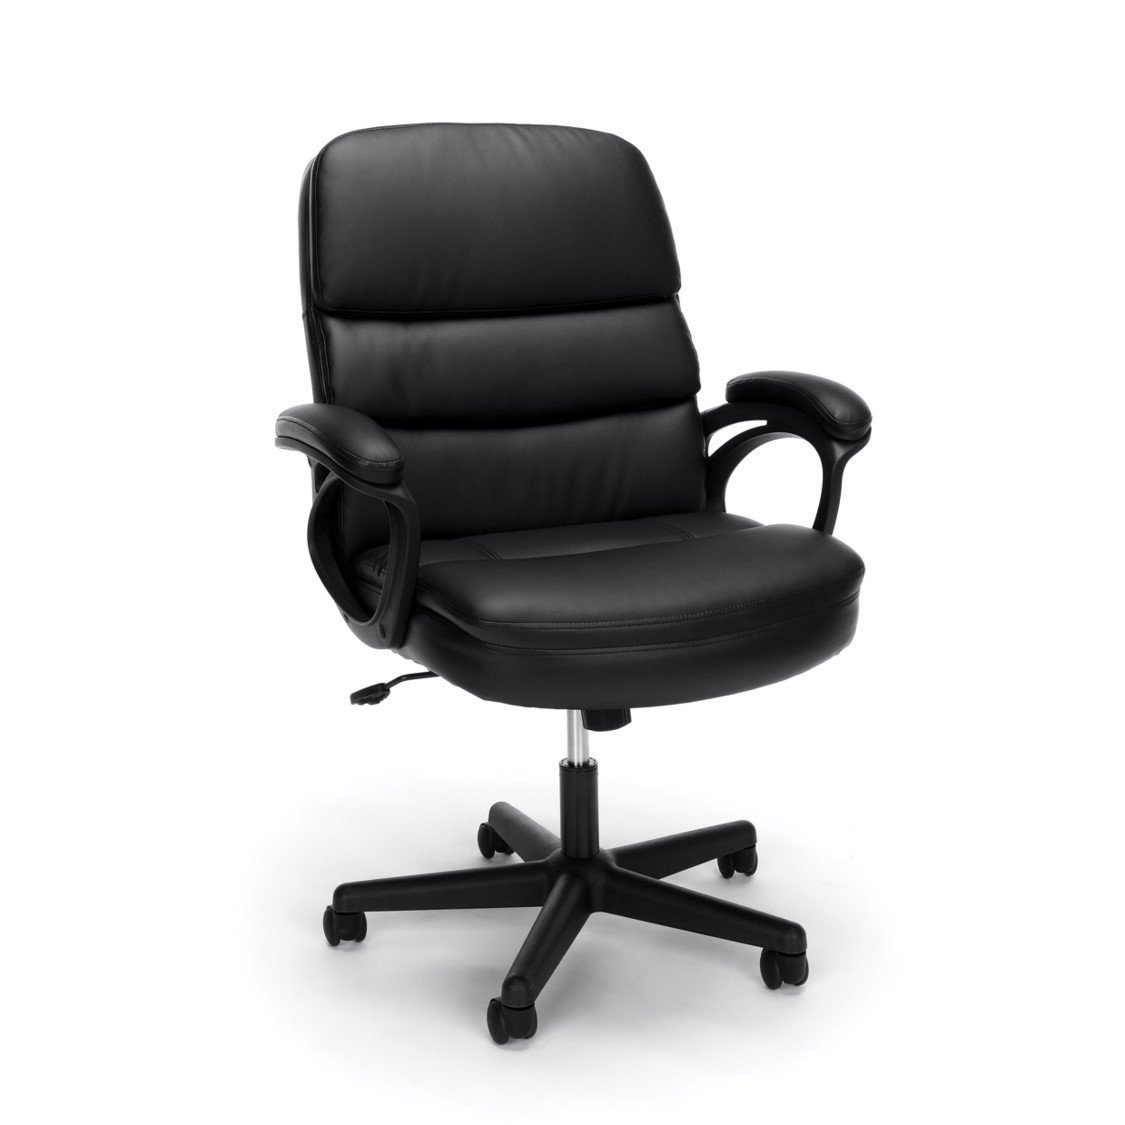 Ess-6025 Leather Executive Chair, Ergonomic Managers Computer & Office Chair, Black